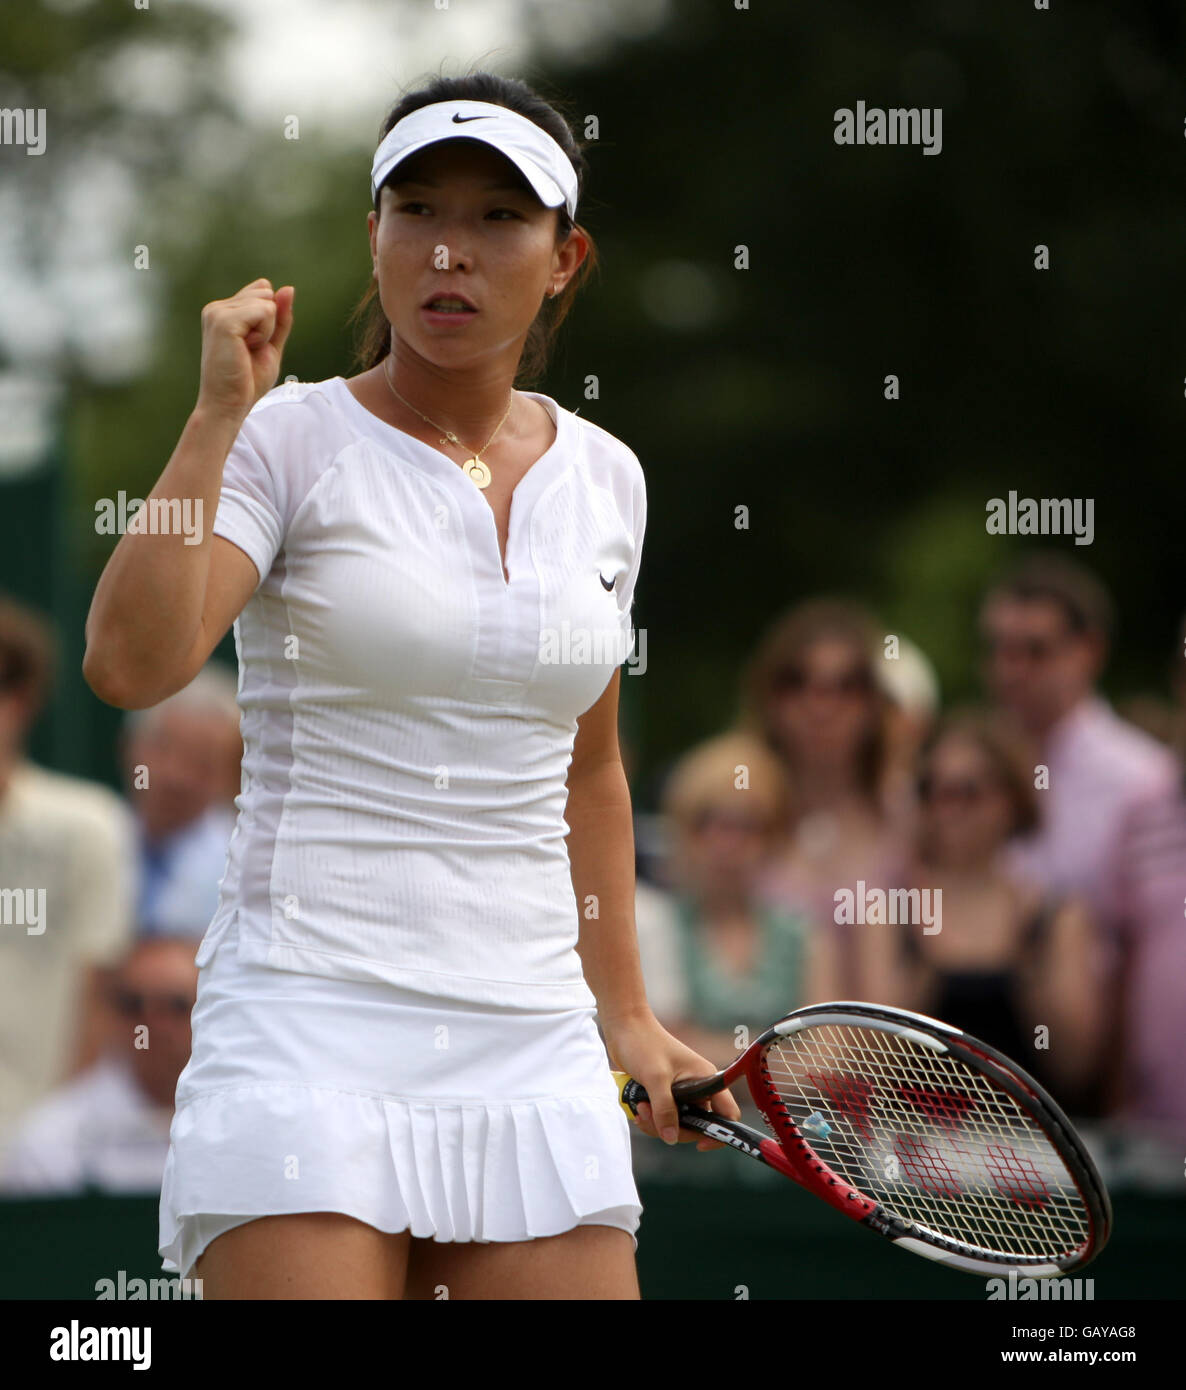 Tennis - Wimbledon Championships 2008 - Day Seven - The All England Club. Zheng Jie celebrates winning a point against Agnes Szavay Stock Photo